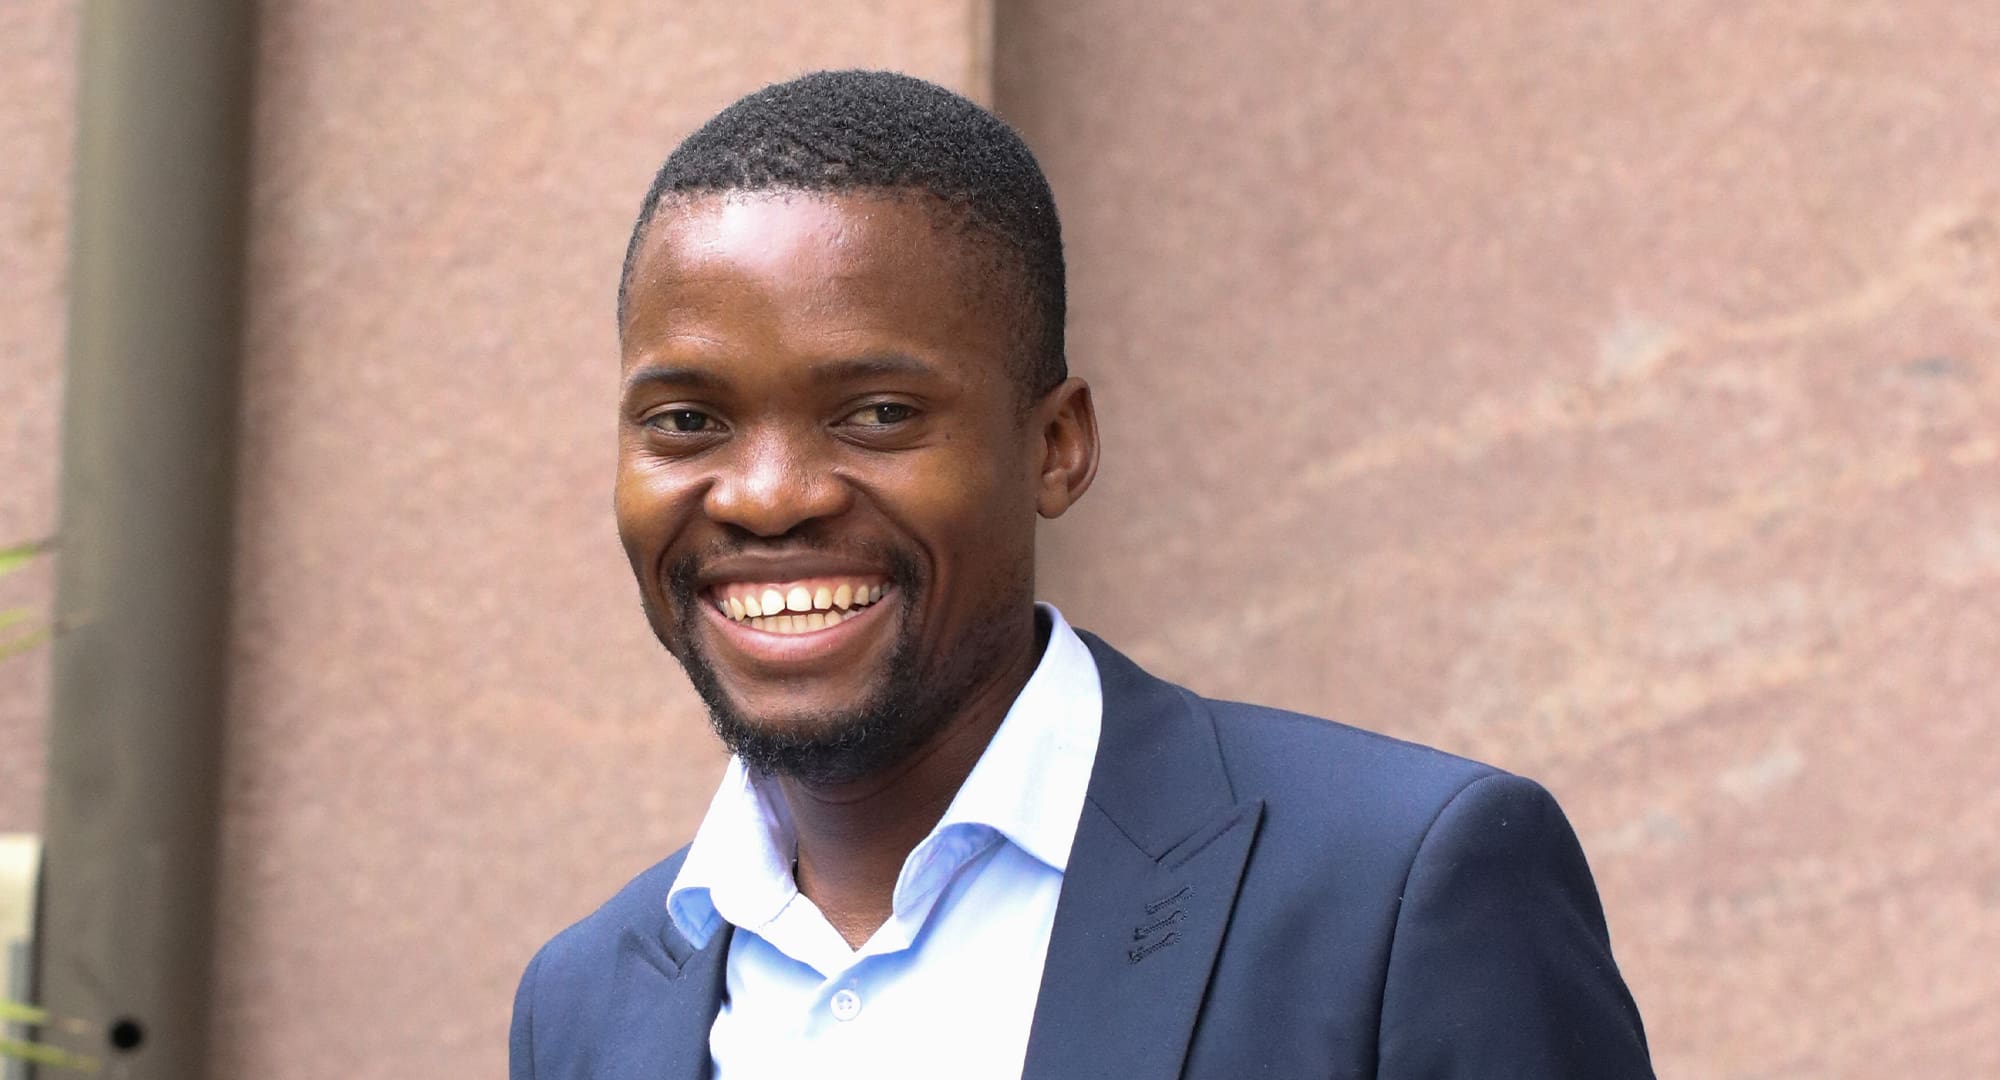 Noko Manamela was unemployed for four years before earning an apprenticeship at Youth Employment Service in Johannesburg